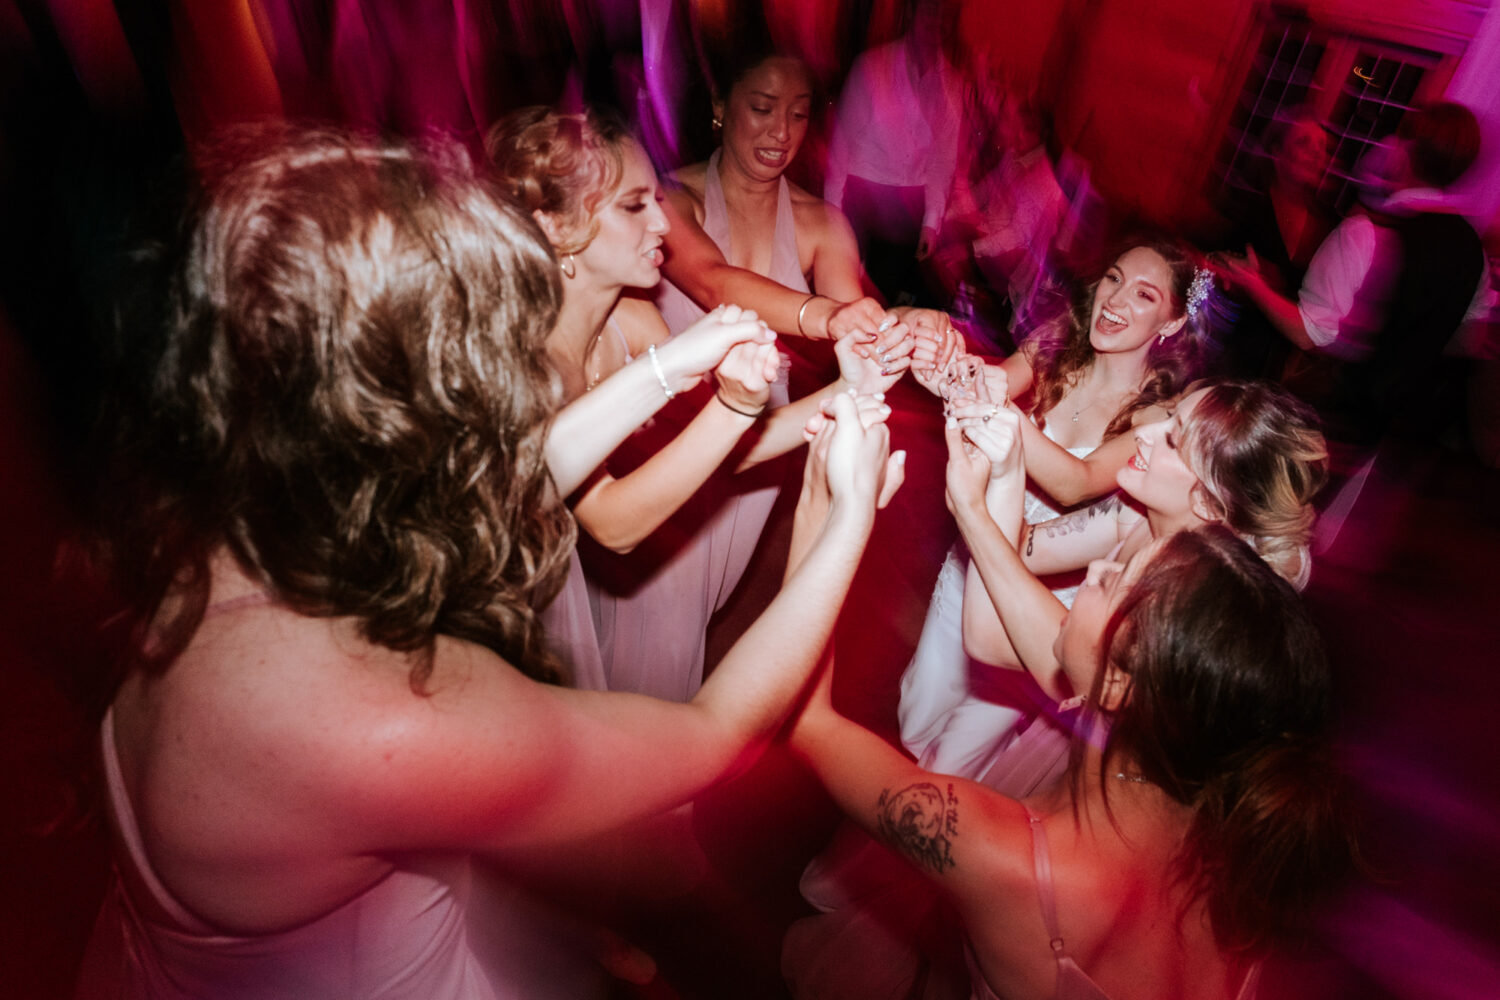 bridesmaids having fun together with the bride and dancing together